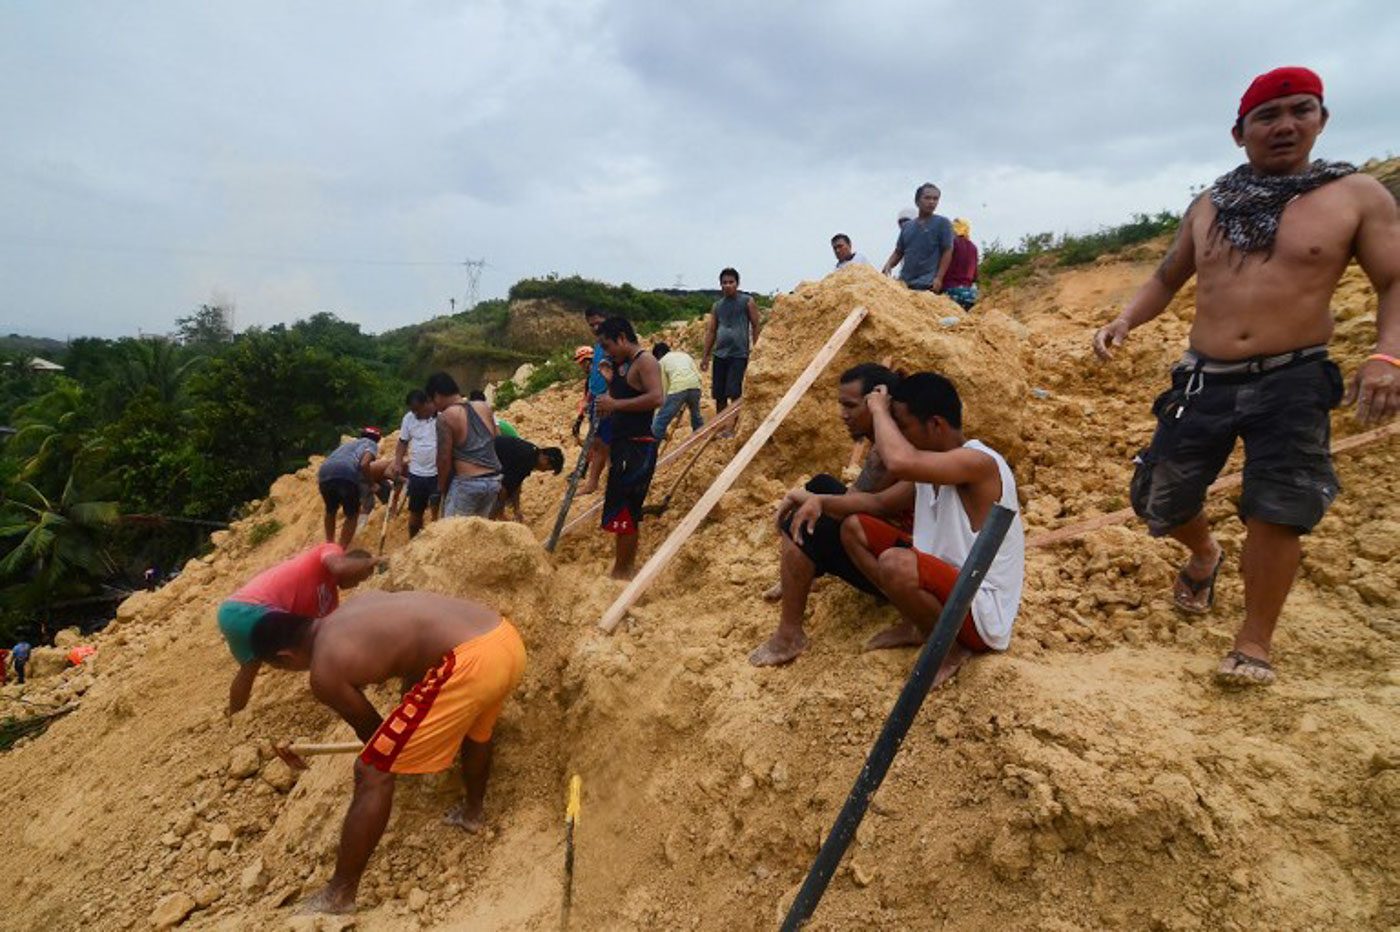 HELPING OUT. Residents help search for survivors at the landslide site in Naga City, Cebu, on September 20, 2018. Photo by Alan Tangcawan/AFP   